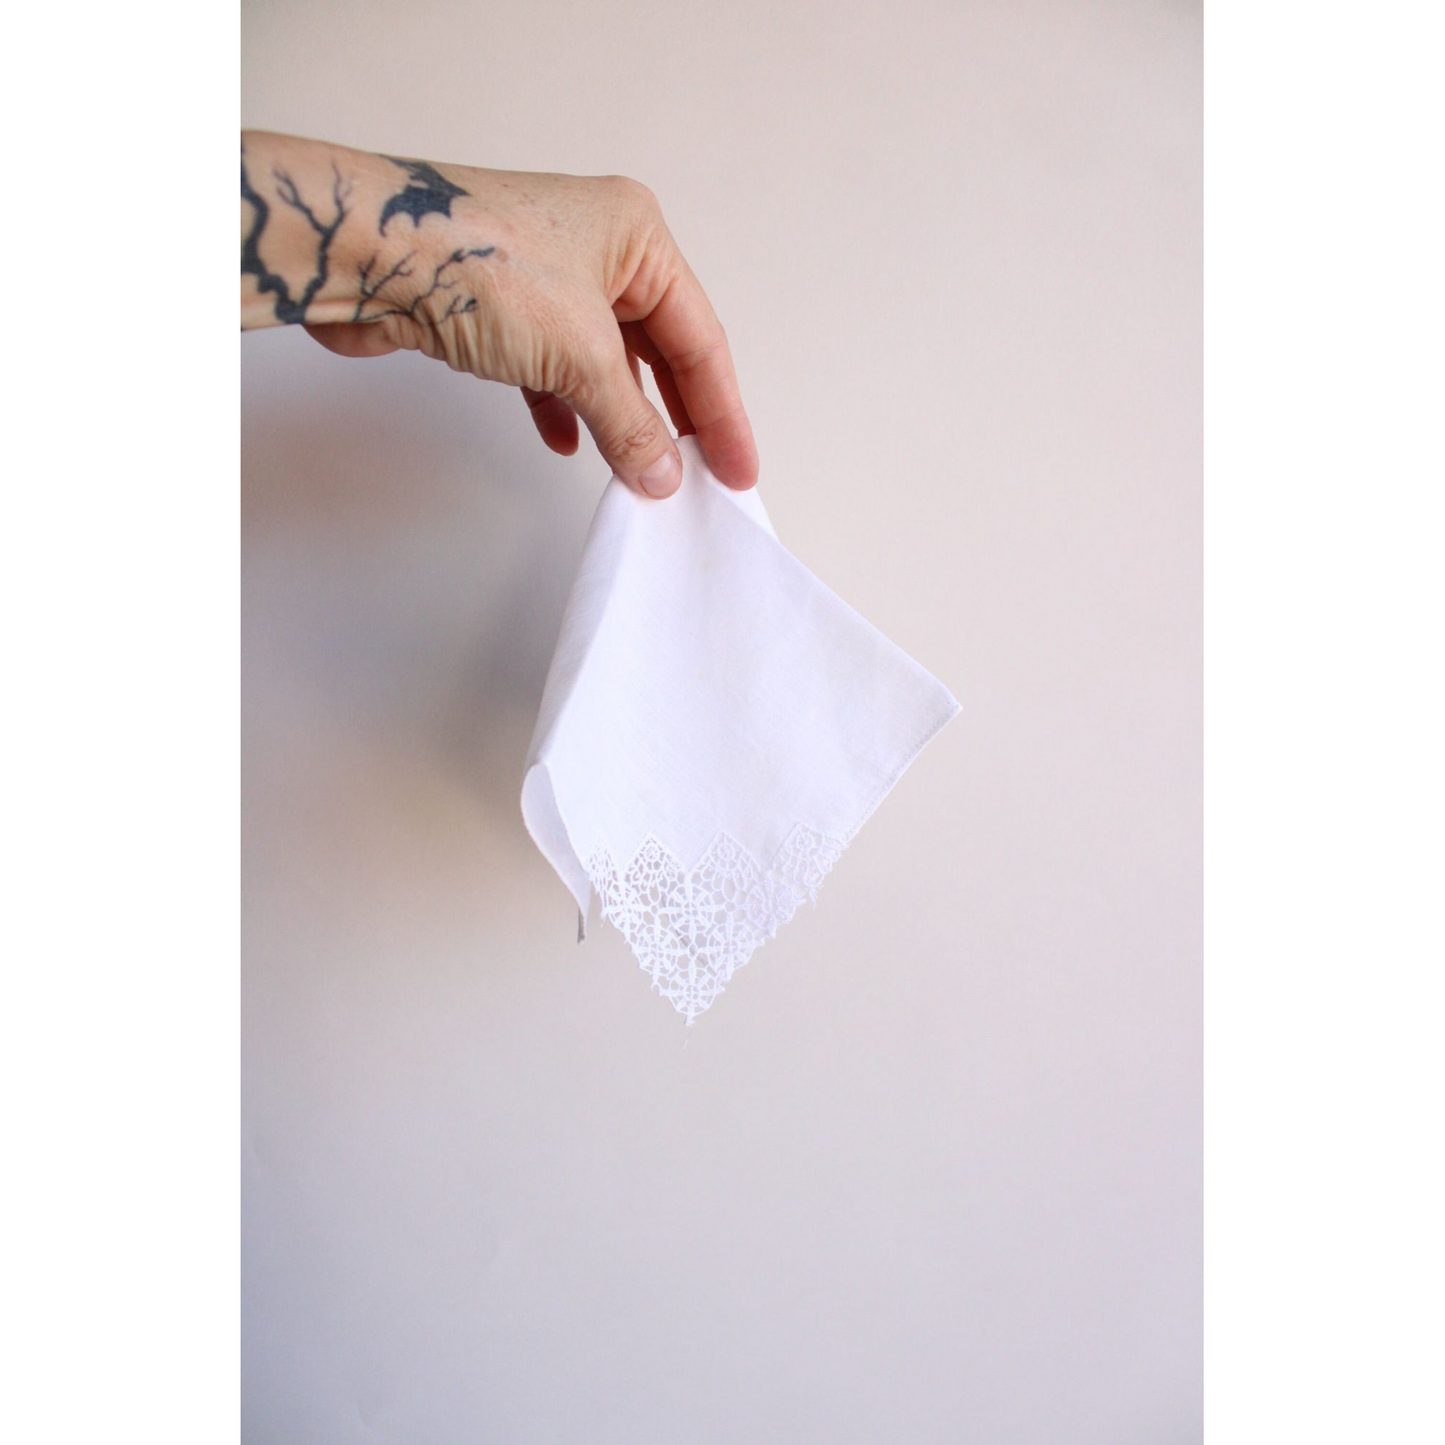 Vintage 1940s 1950s Handkerchief with a White Lace Corner